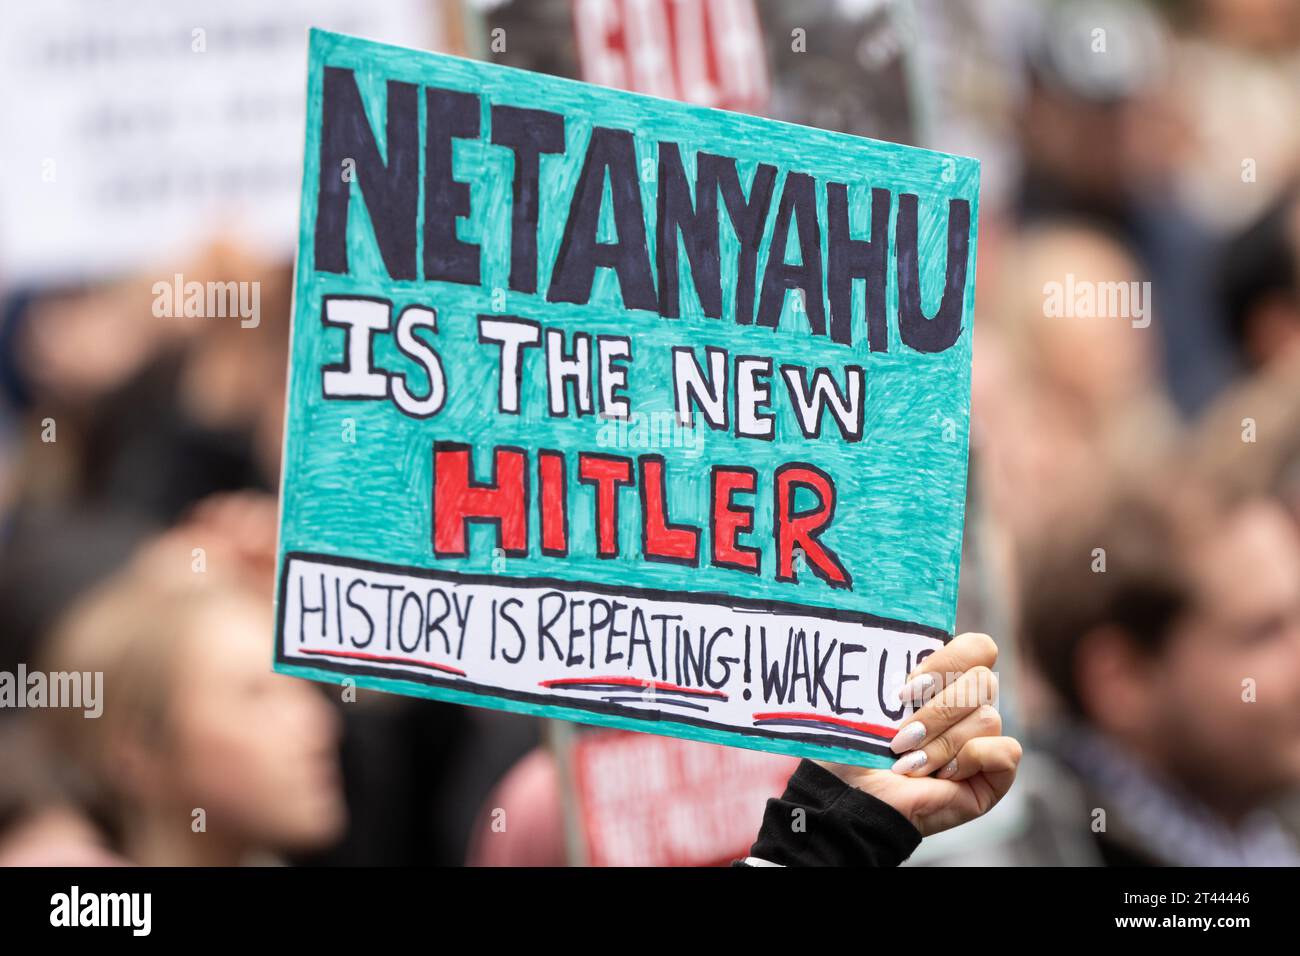 Netanyahu is hitler placard held as Thousands of pro-Palestine protesters gathered for a mass demonstration in Manchester UK. Protesters marched from St Peter's Square in the city centre.Flags and banners were held aloft and flares were let off. Speeches were given at St Peter's Square before and after the circular march. Picture: garyroberts/worldwidefeatures.com Stock Photo